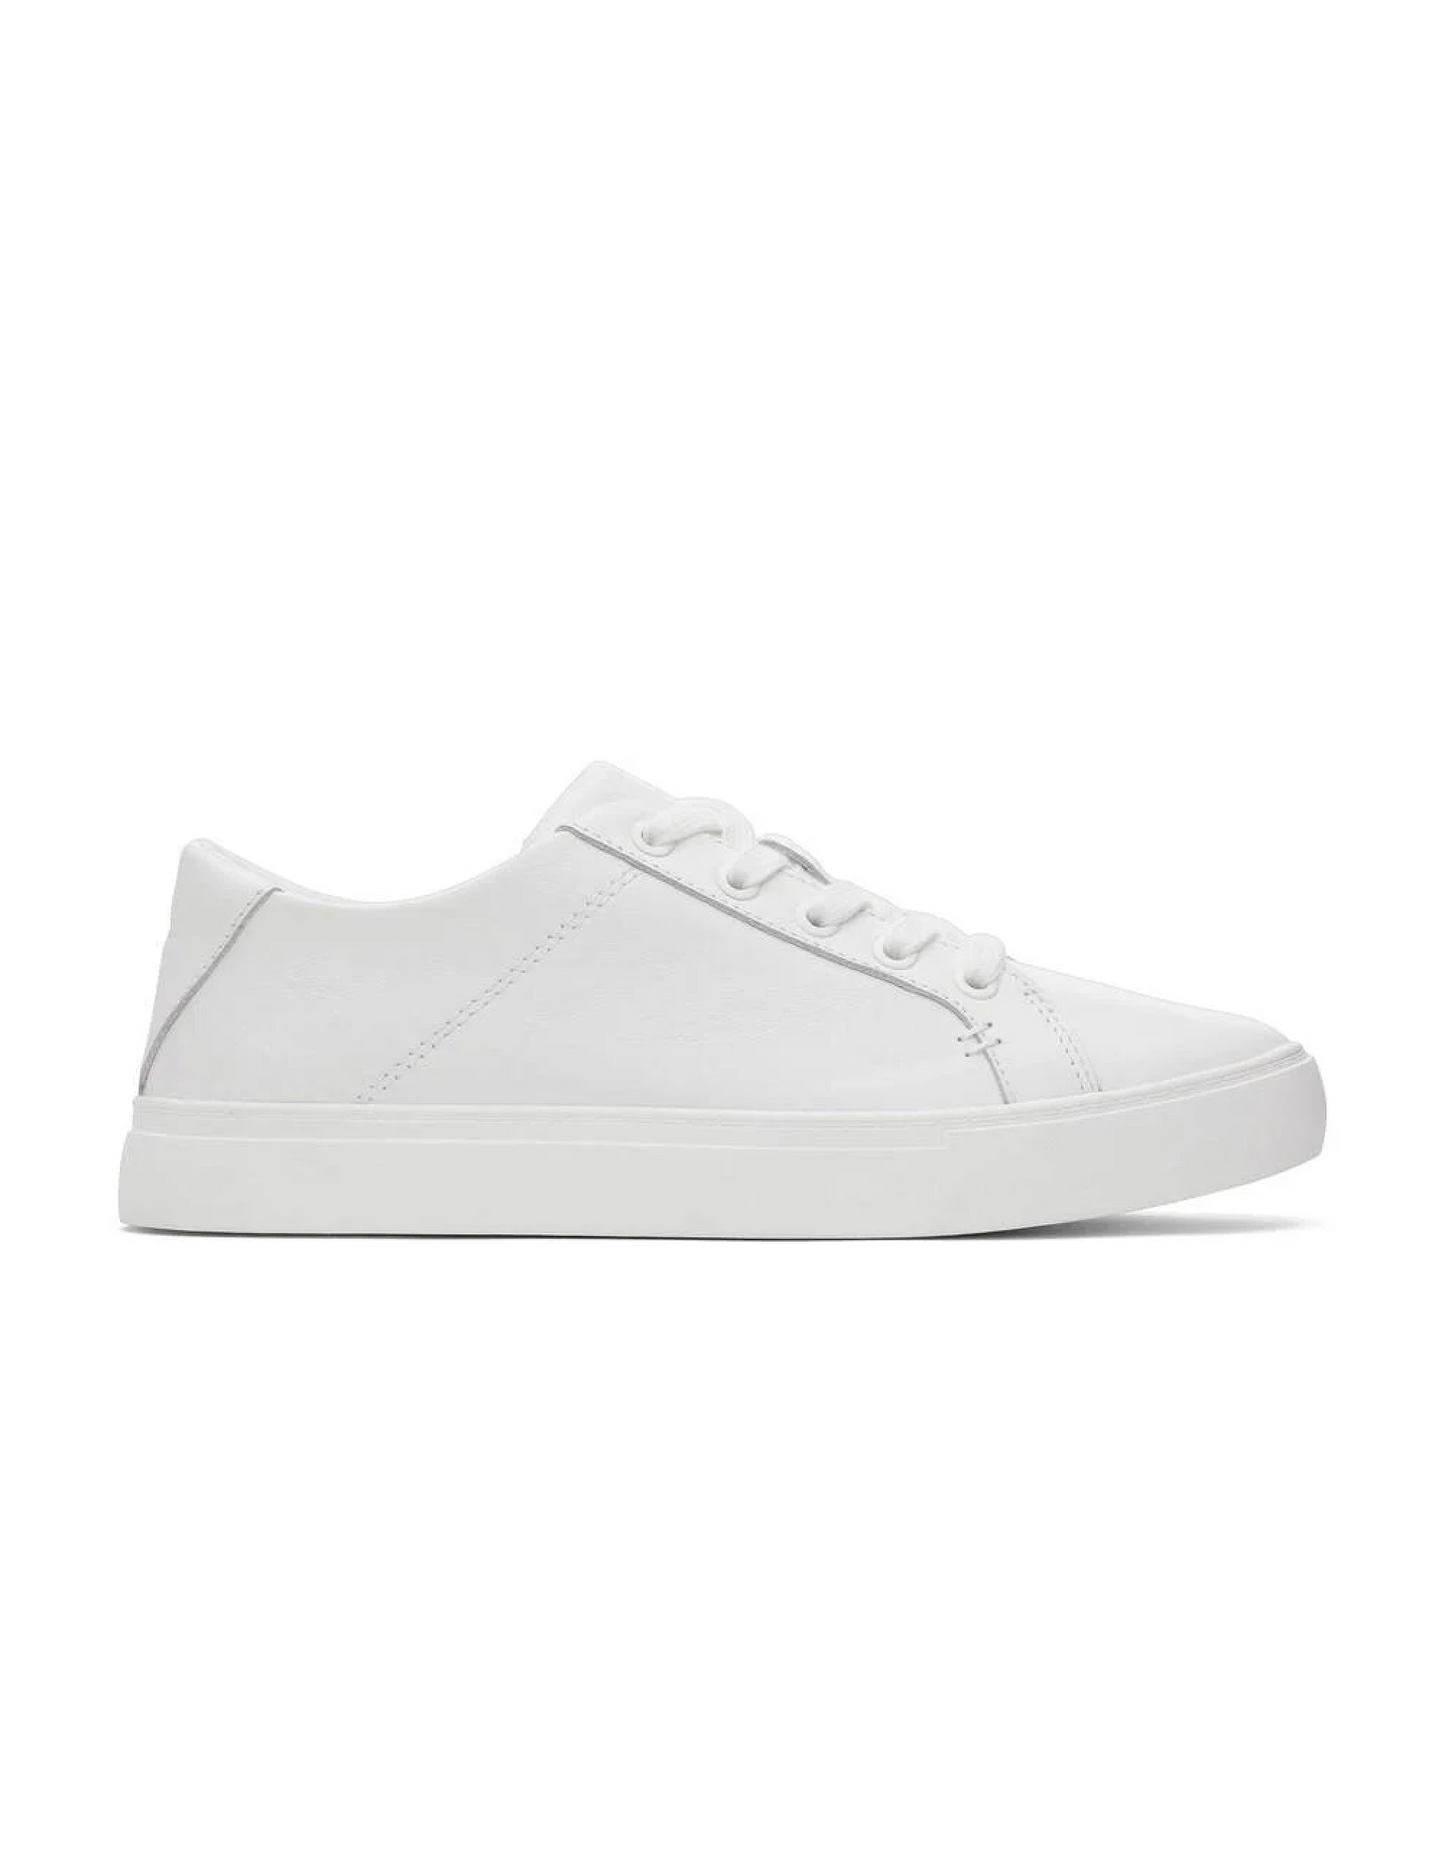 Toms Kameron Lace Up White Leather